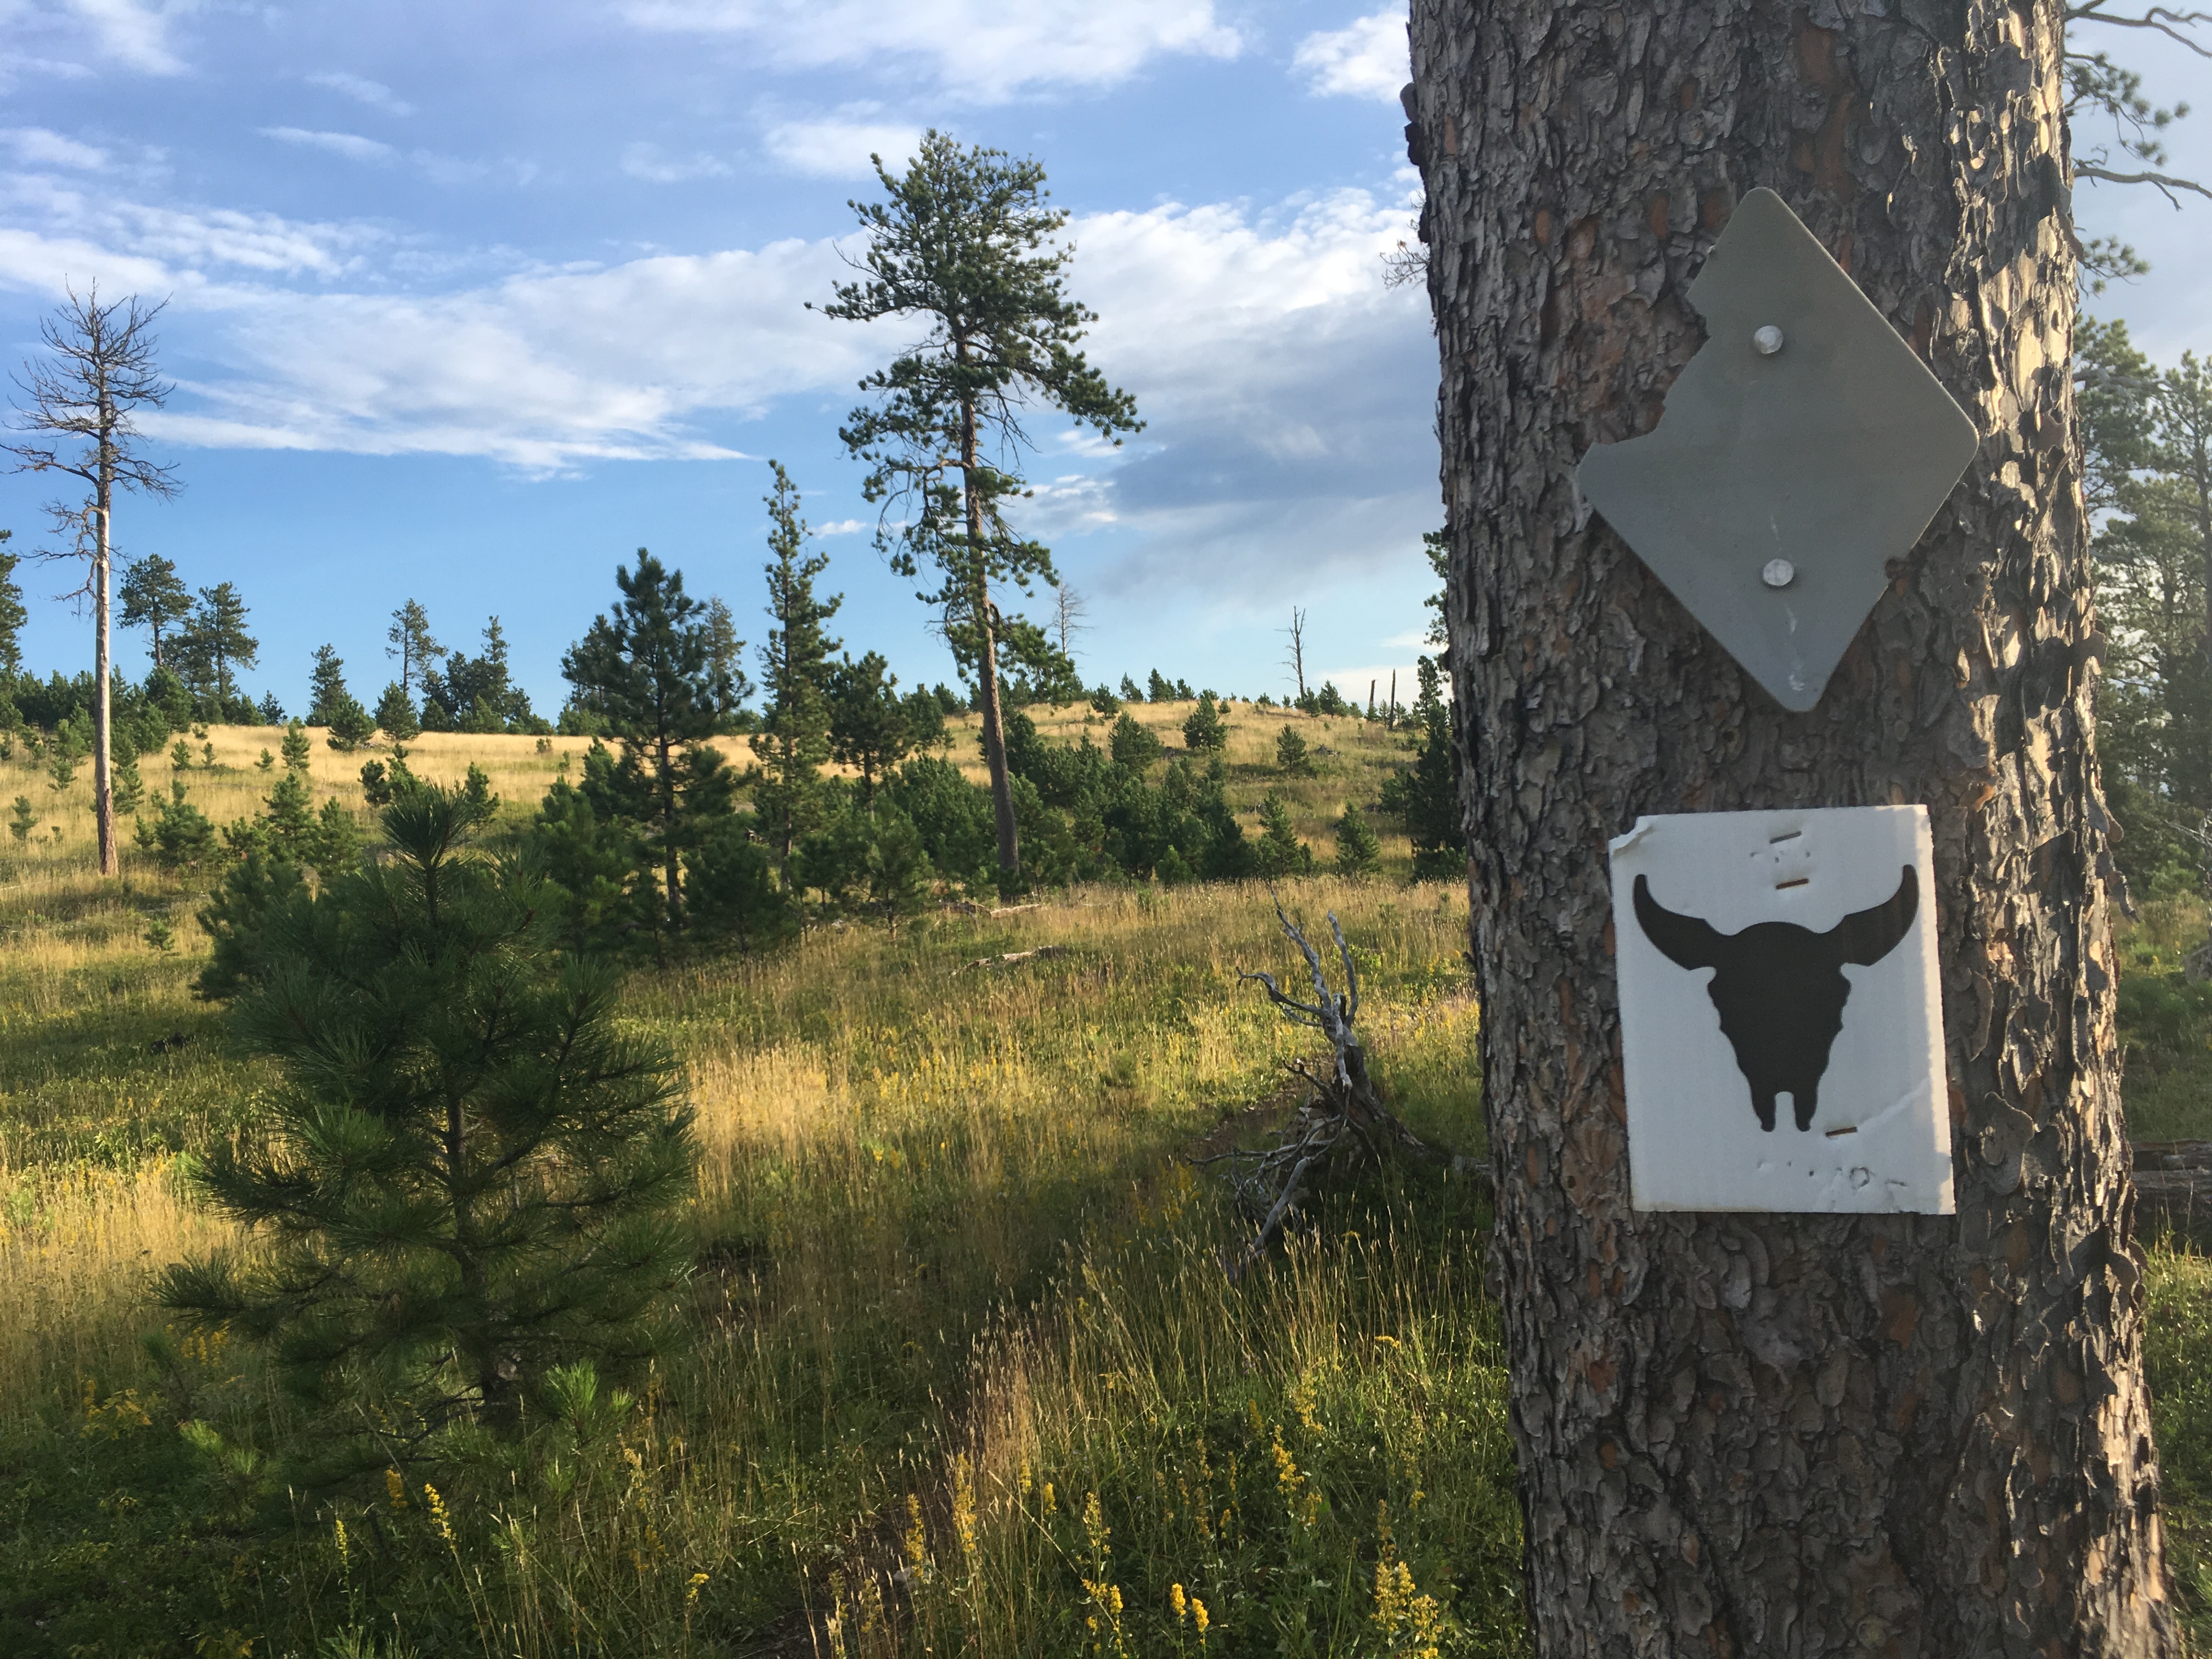 A 'confidence marker' on the Centennial Trail in South Dakota. The Great Plains Trail is contiguous with the Centennial Trail through the Black Hills